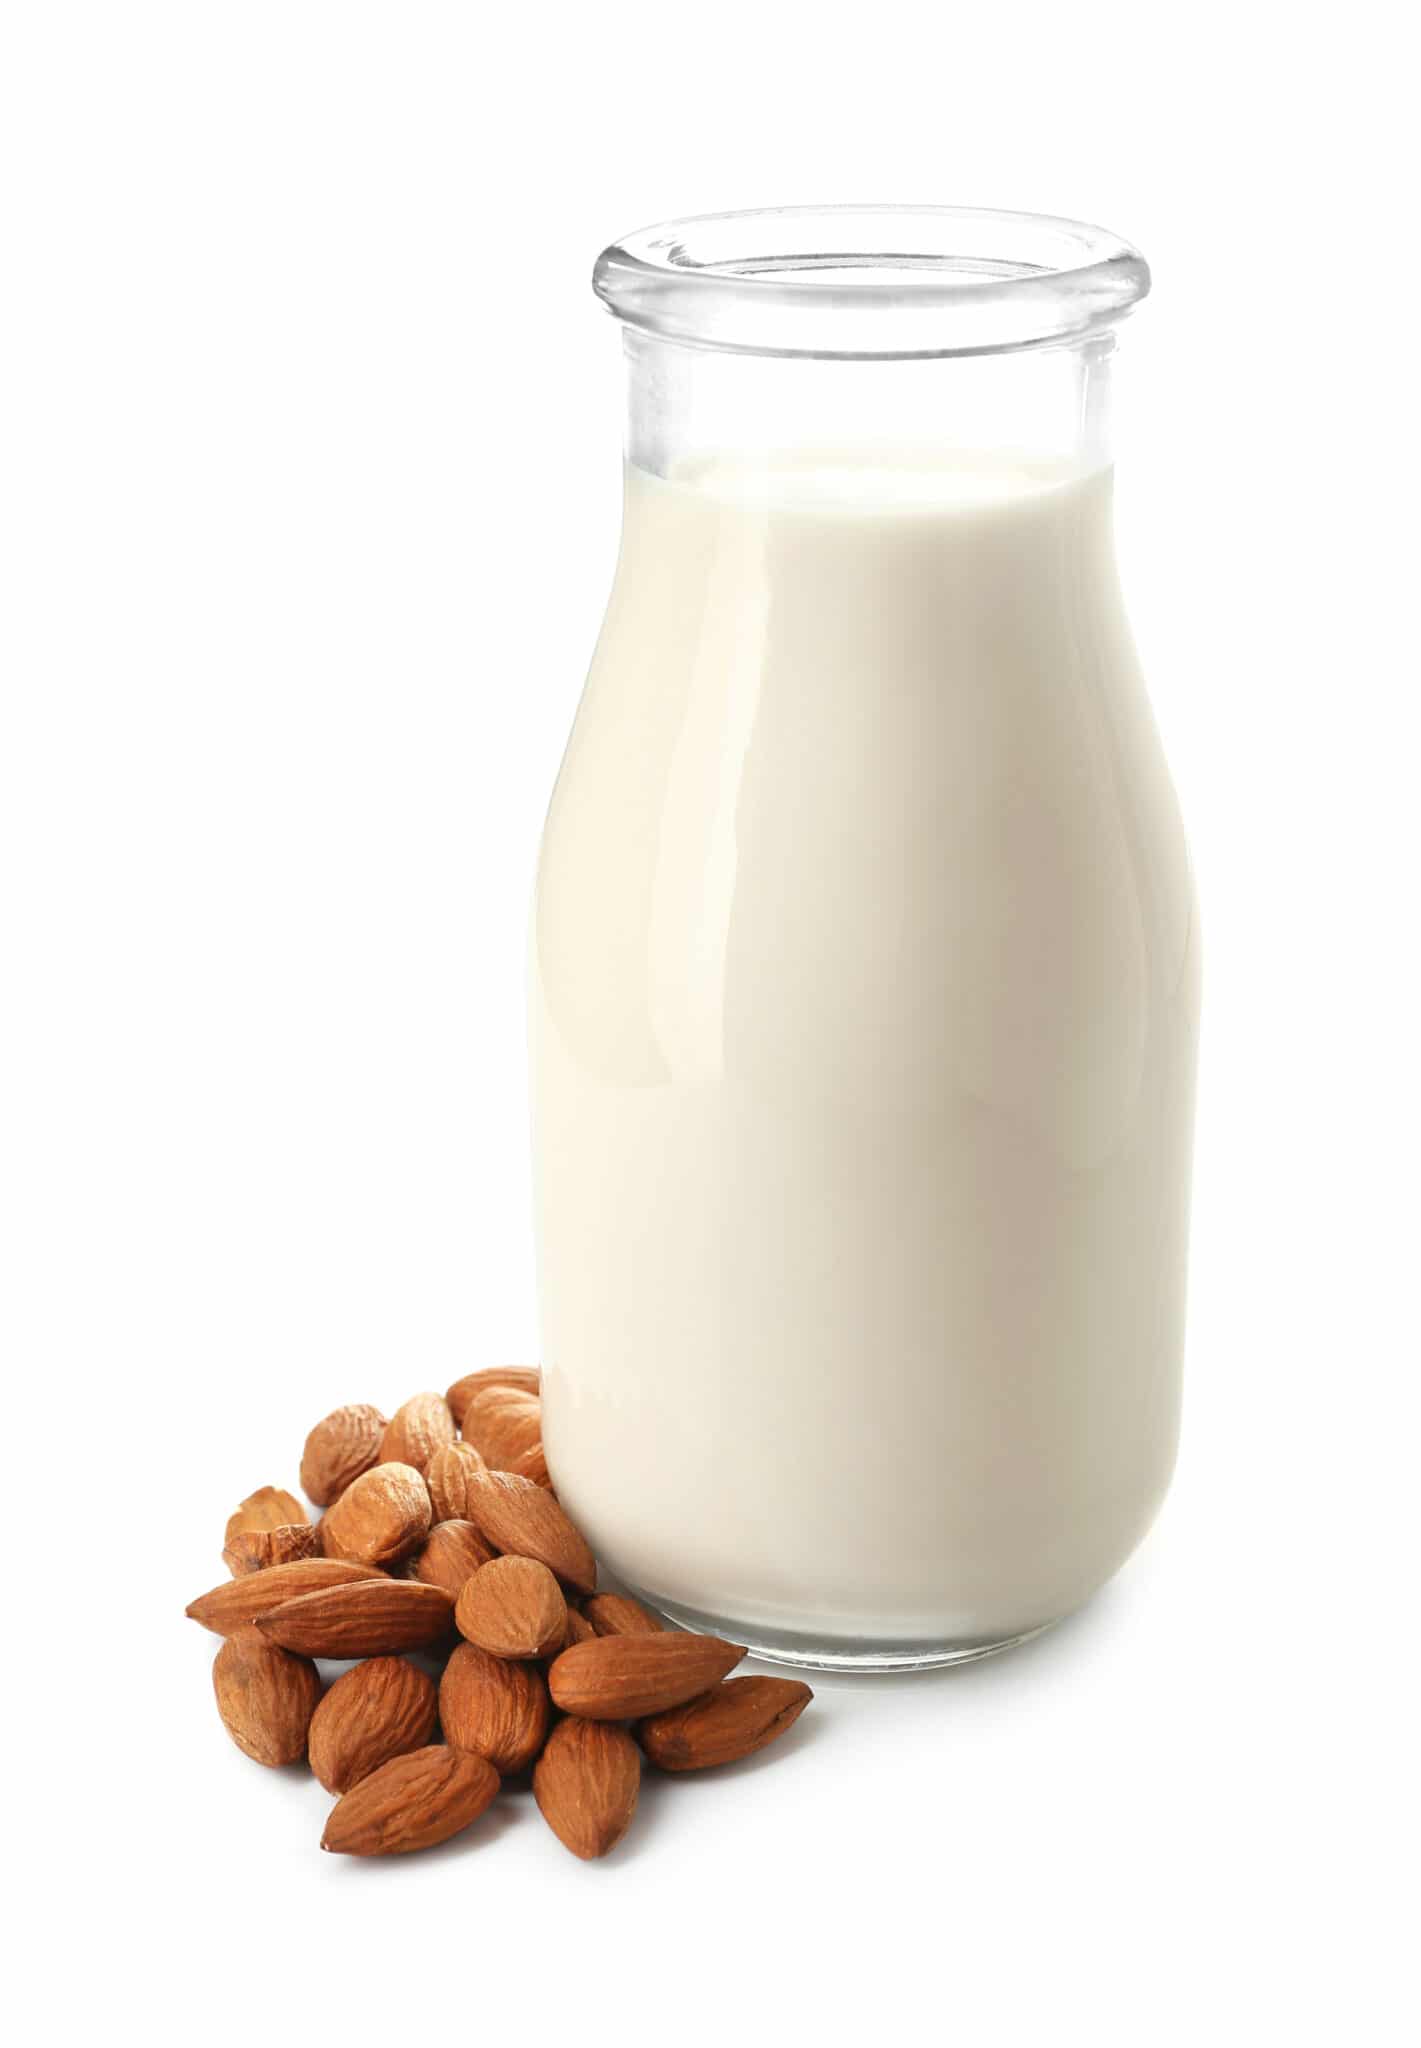 A tall glass bottle of almond milk, with a small pile of almonds beside it.